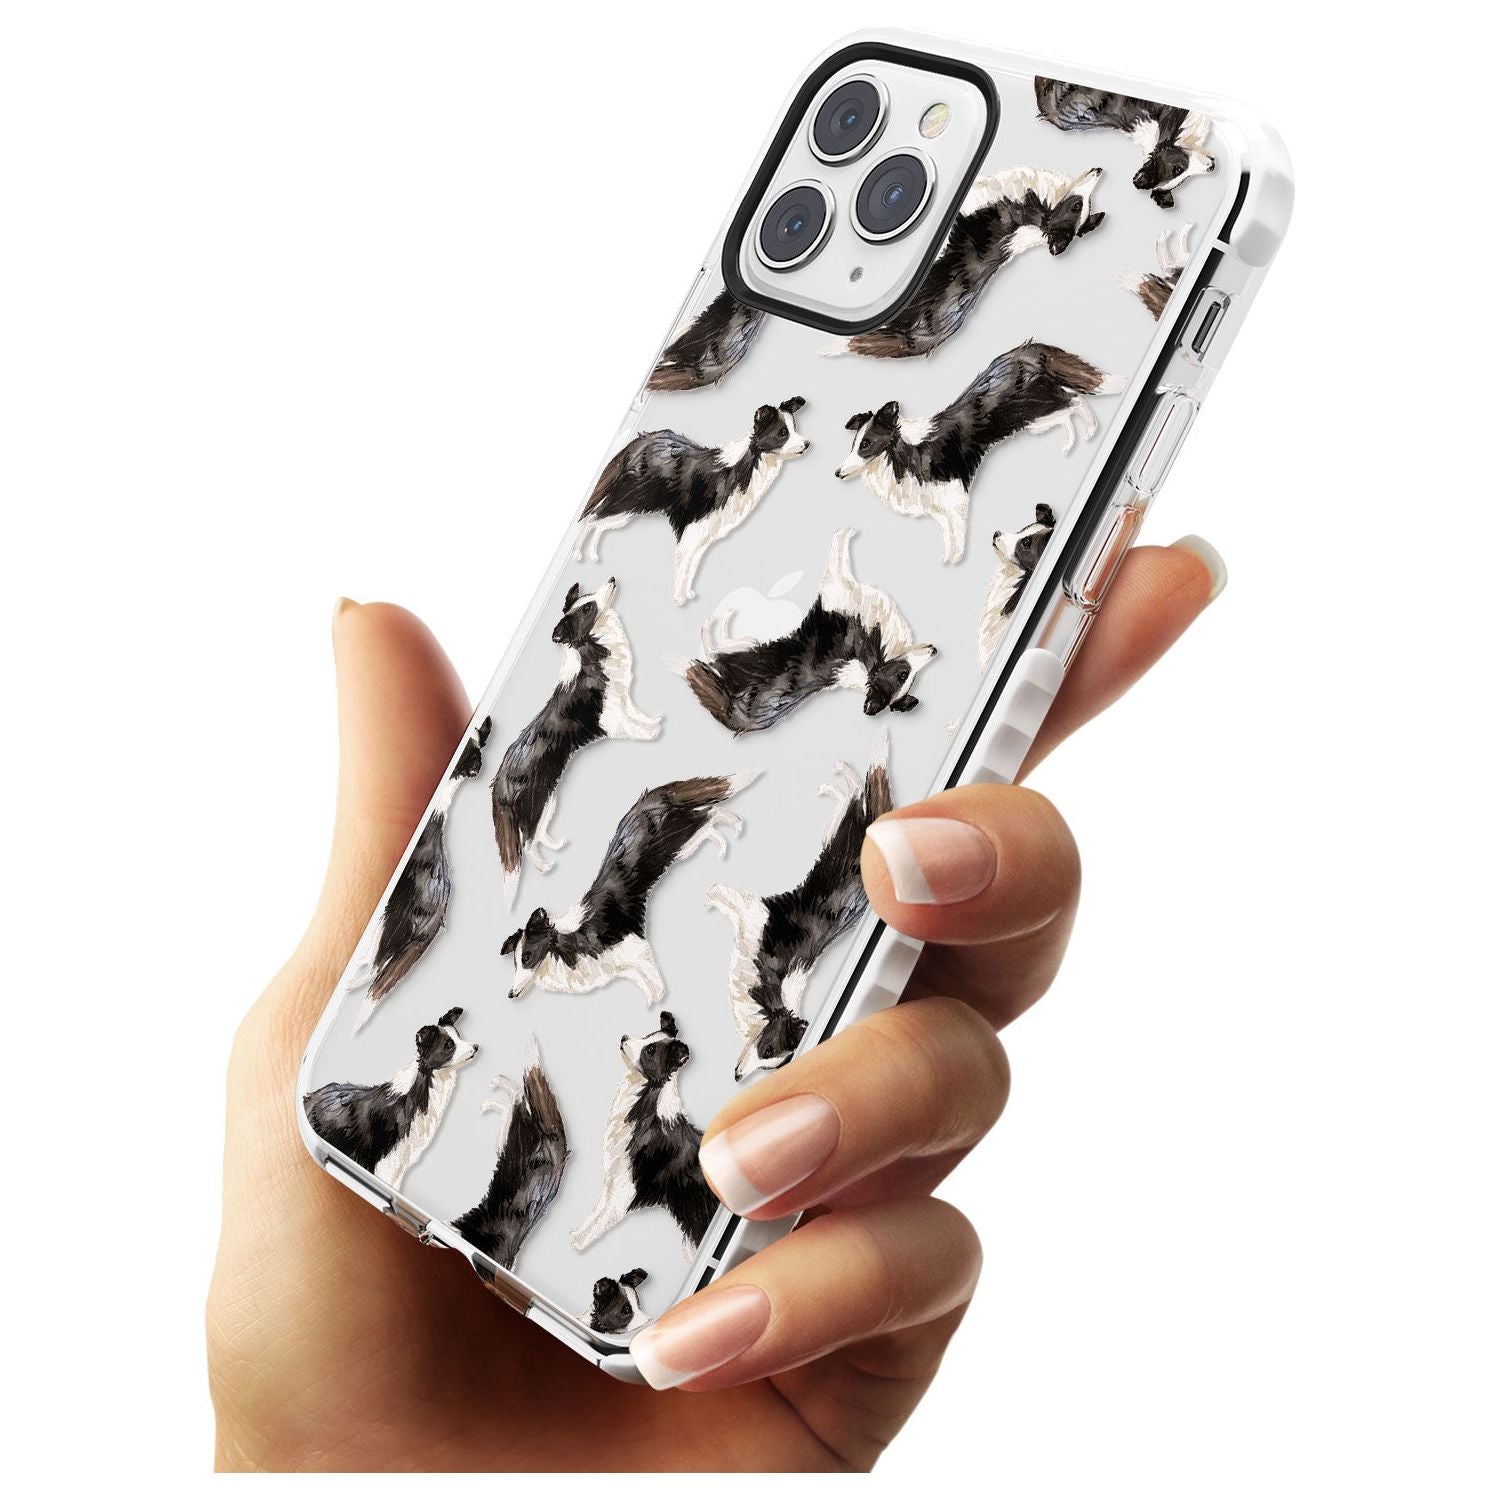 Border Collie Watercolour Dog Pattern Impact Phone Case for iPhone 11 Pro Max